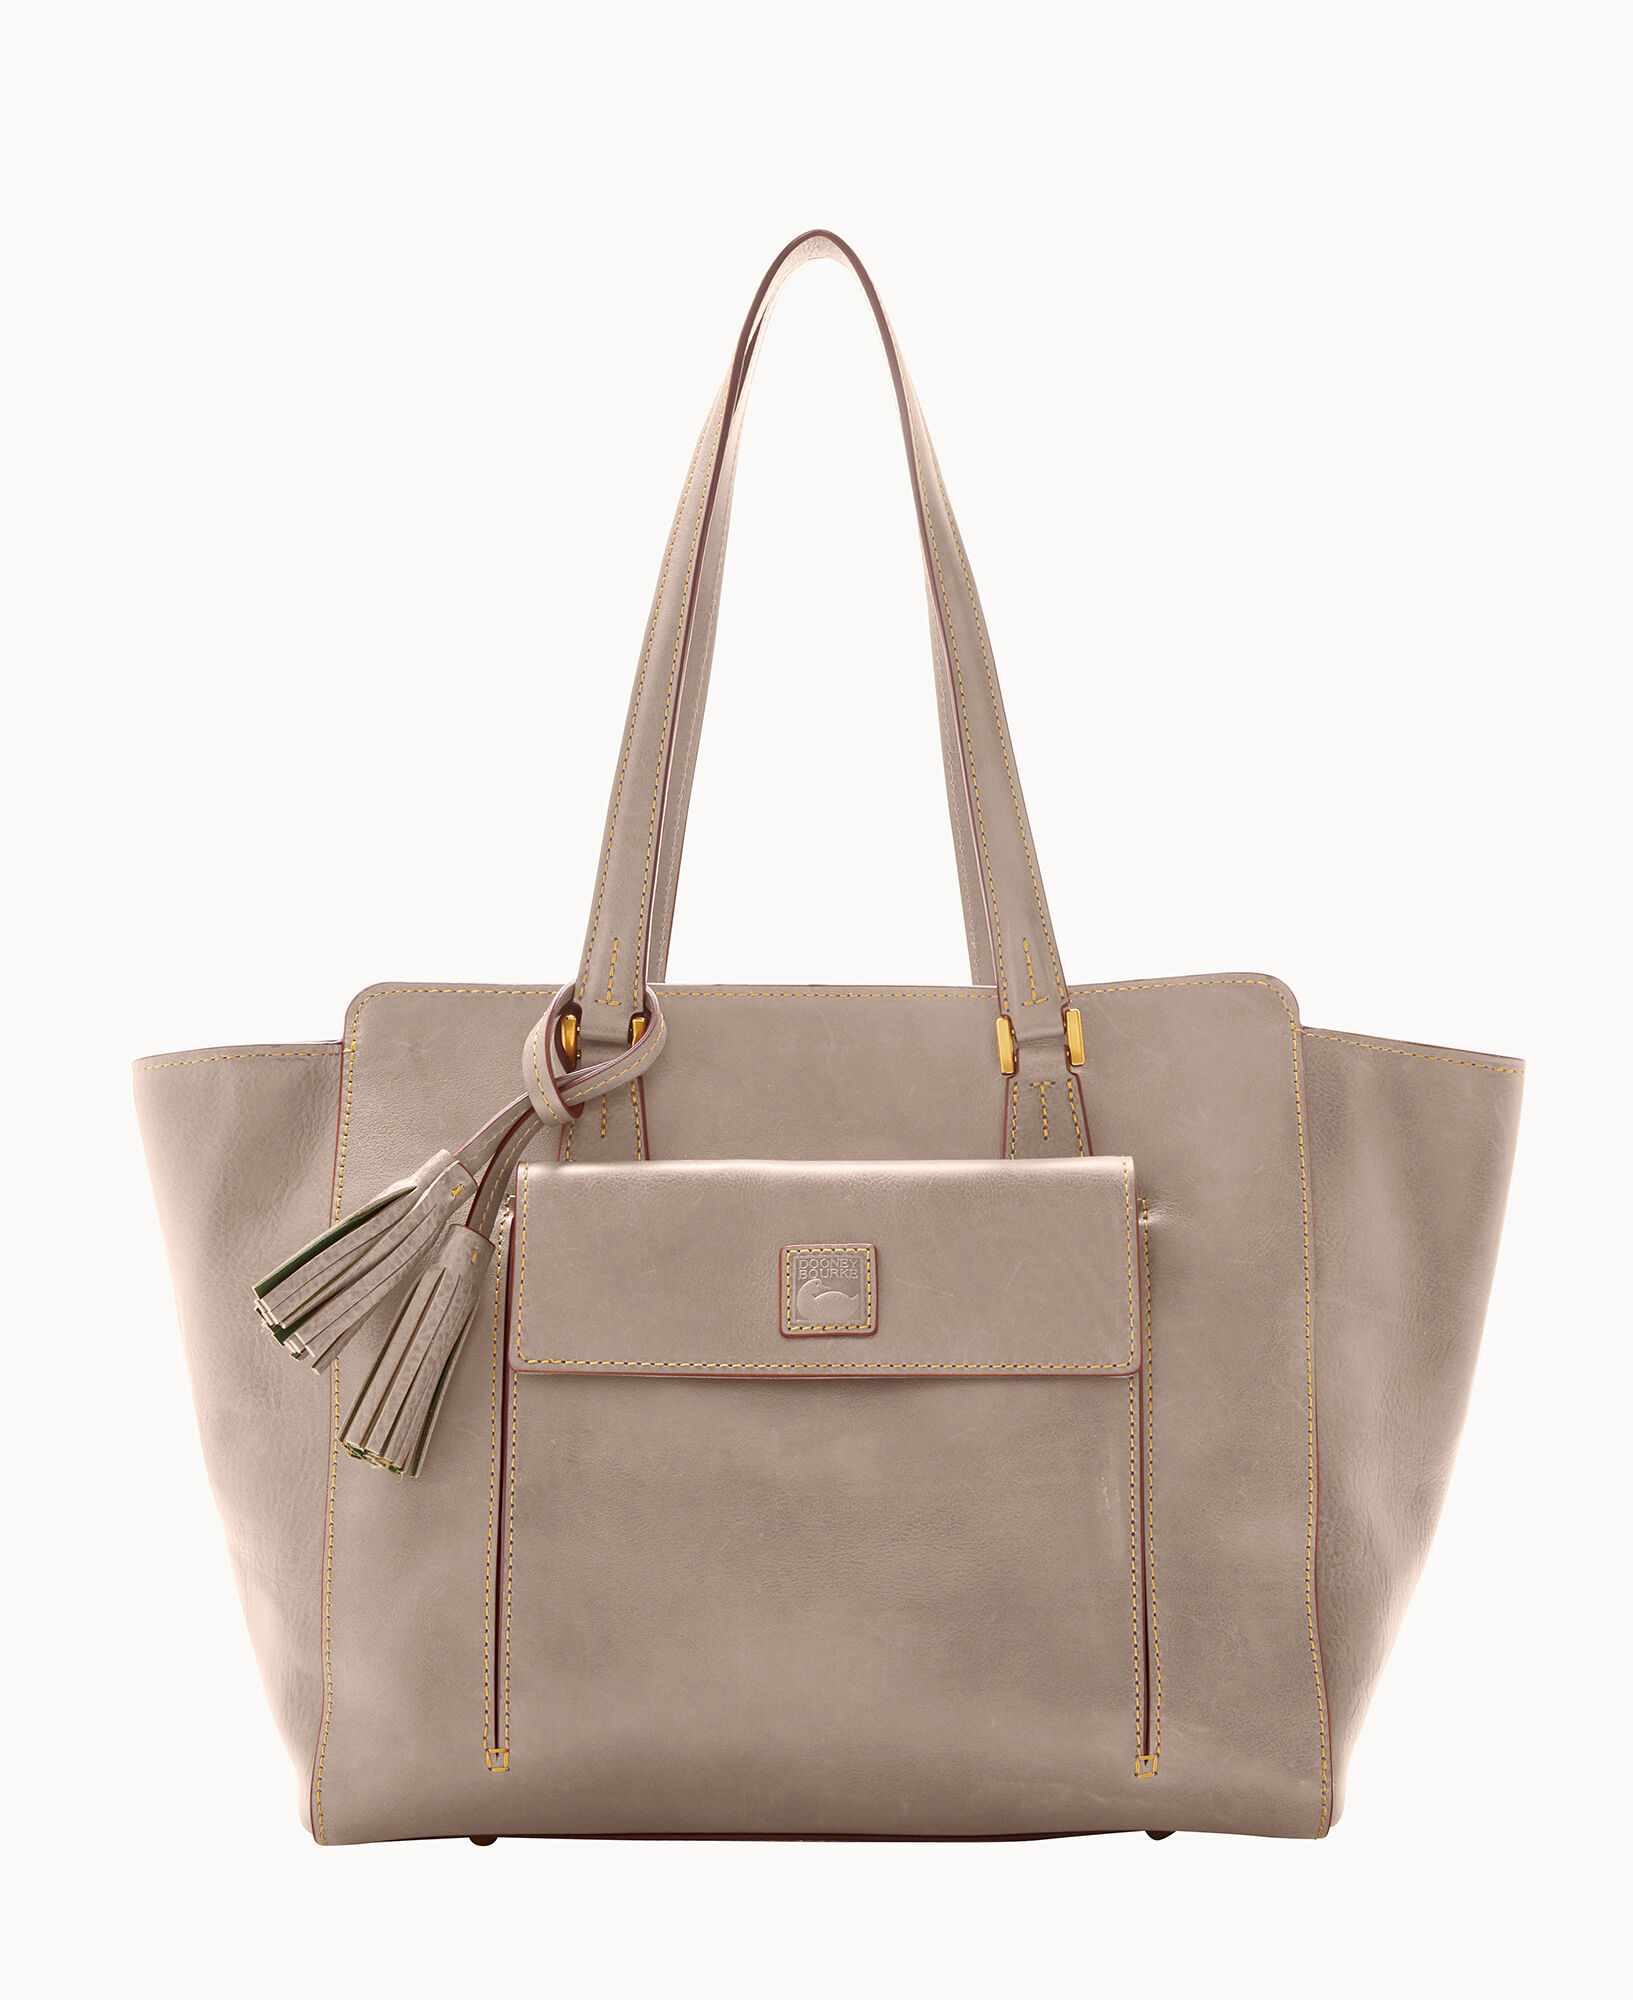 Dooney Bourke Archives 1997 Suede Large Tote ,Olive